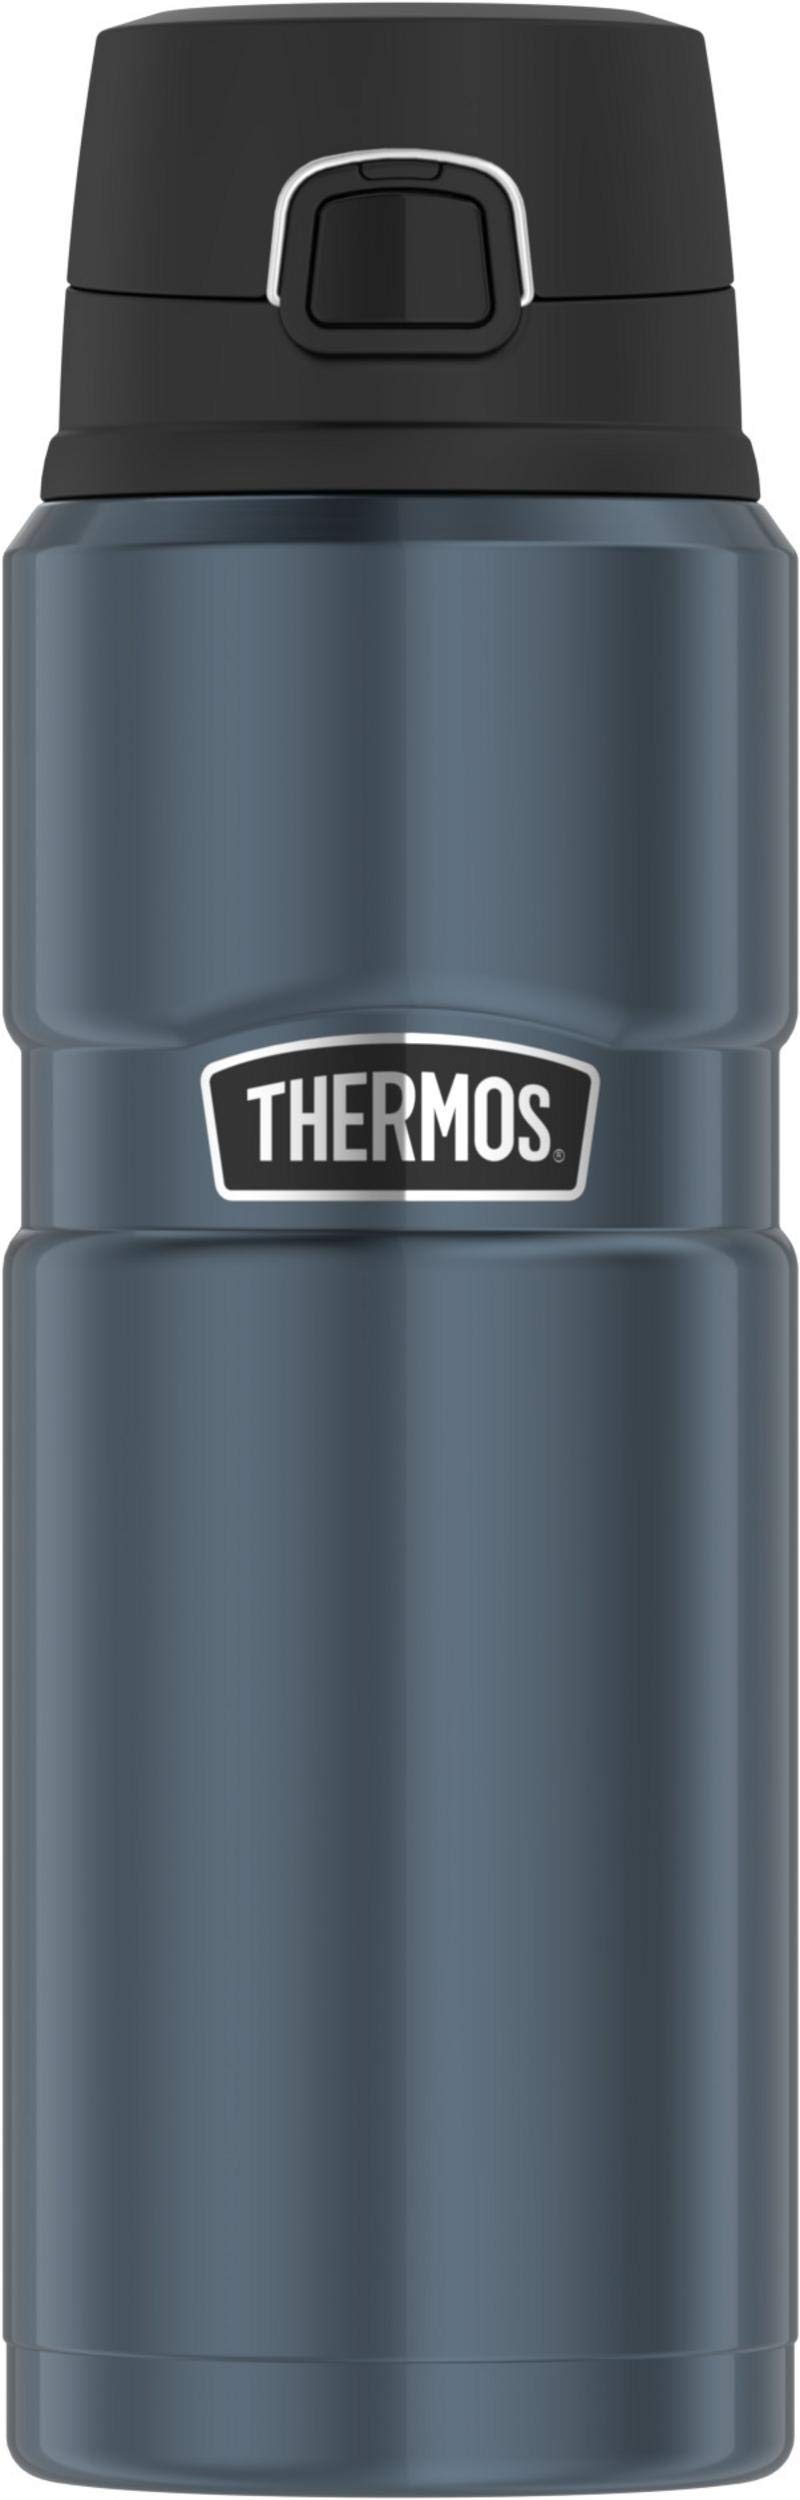 Thermos Stainless King 24-Ounce Drink Bottle, Slate